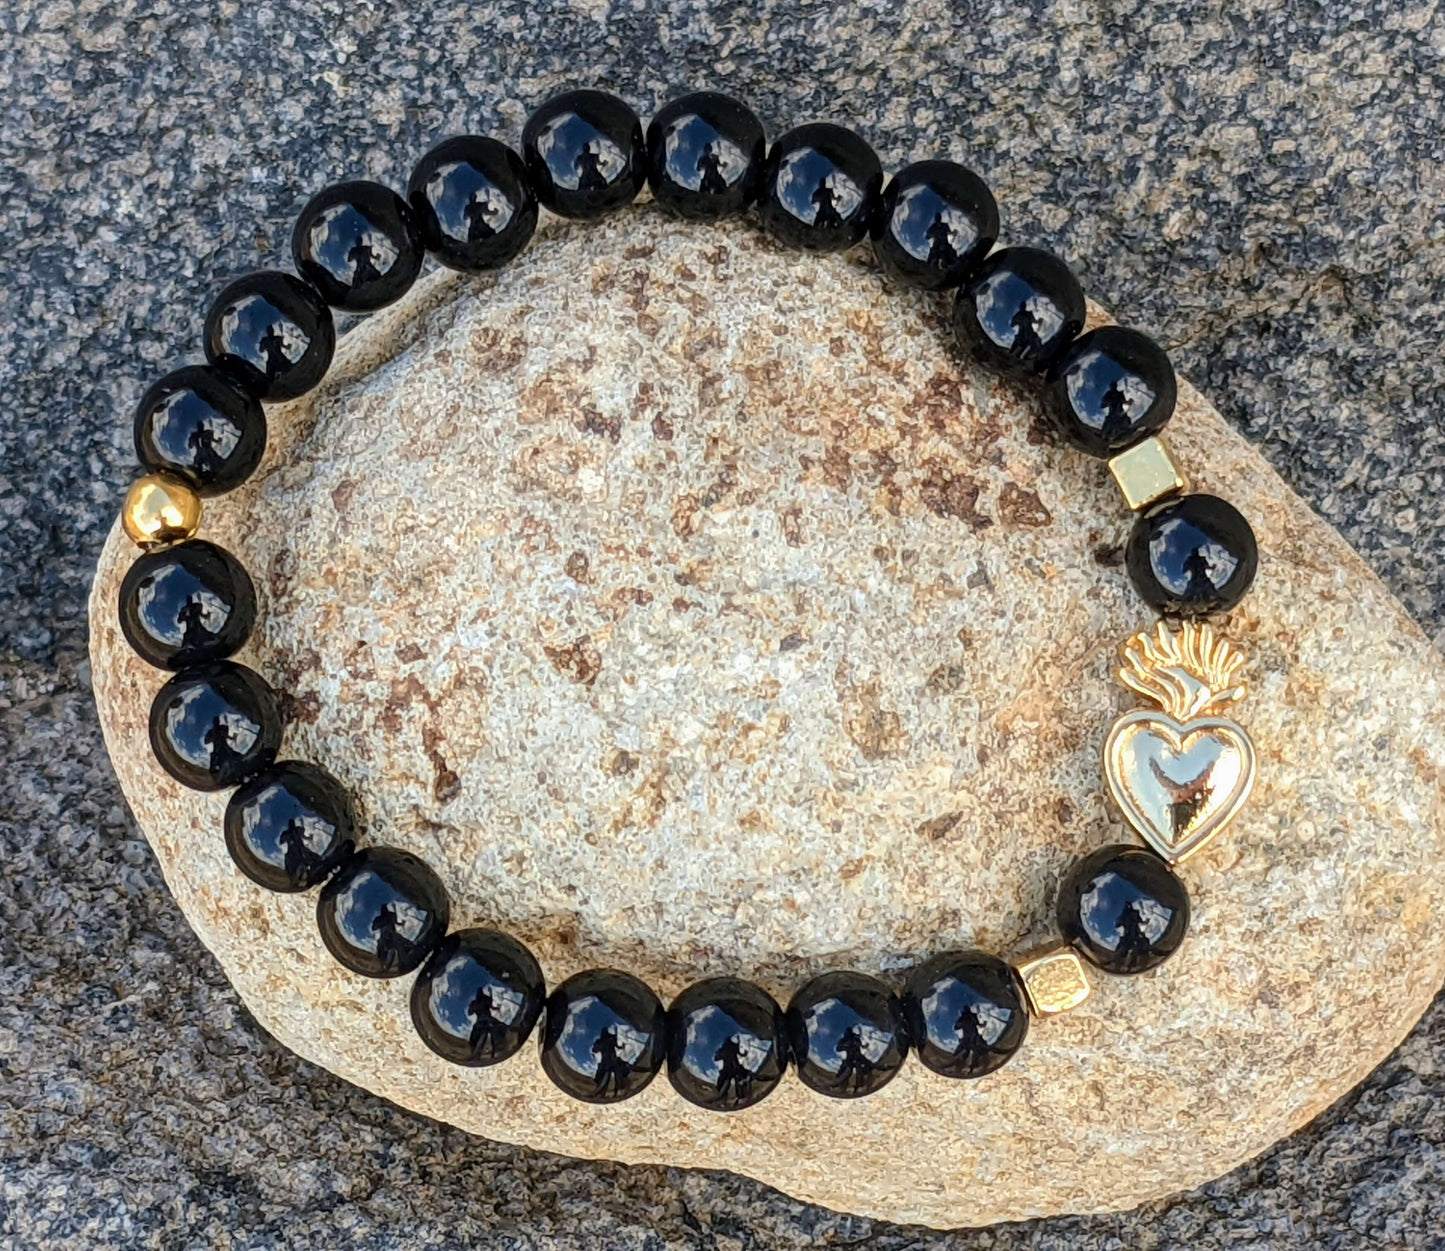 Black Onyx Polished (8mm Bead Size) with Flaming Golden Heart